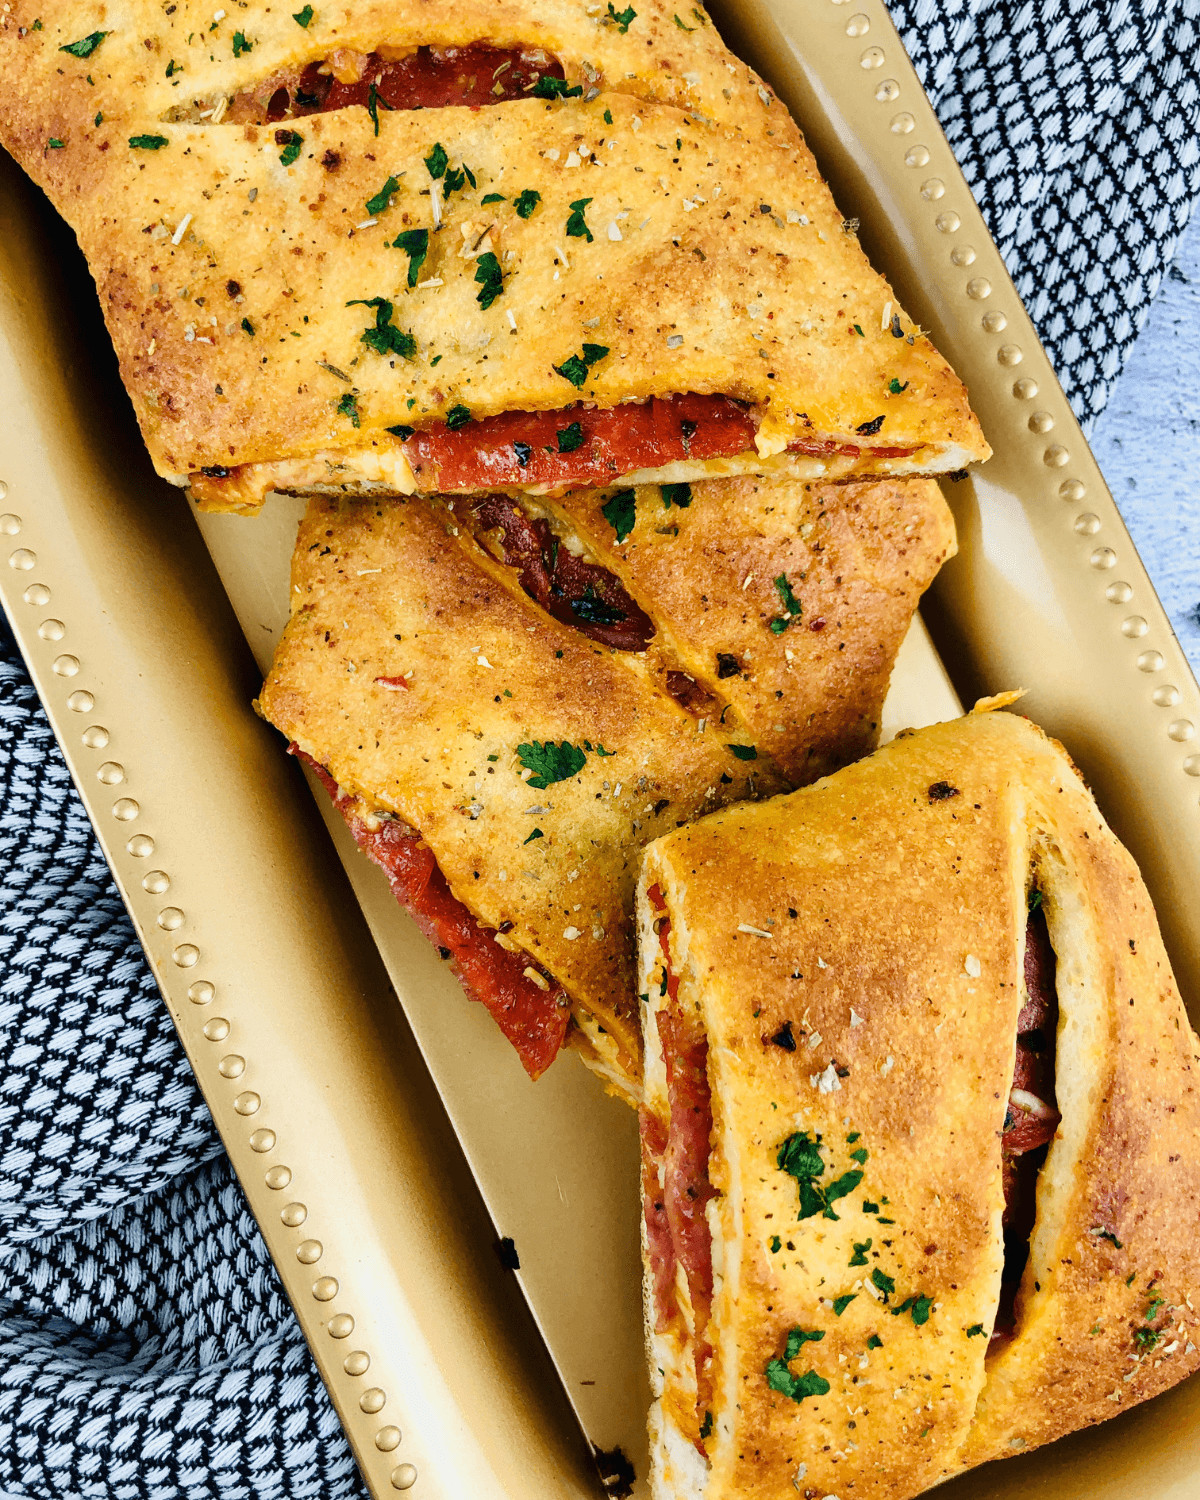 An Italian stromboli filled with pepperoni and cheese, garnished with herbs, served on a beige tray with a checkered napkin.